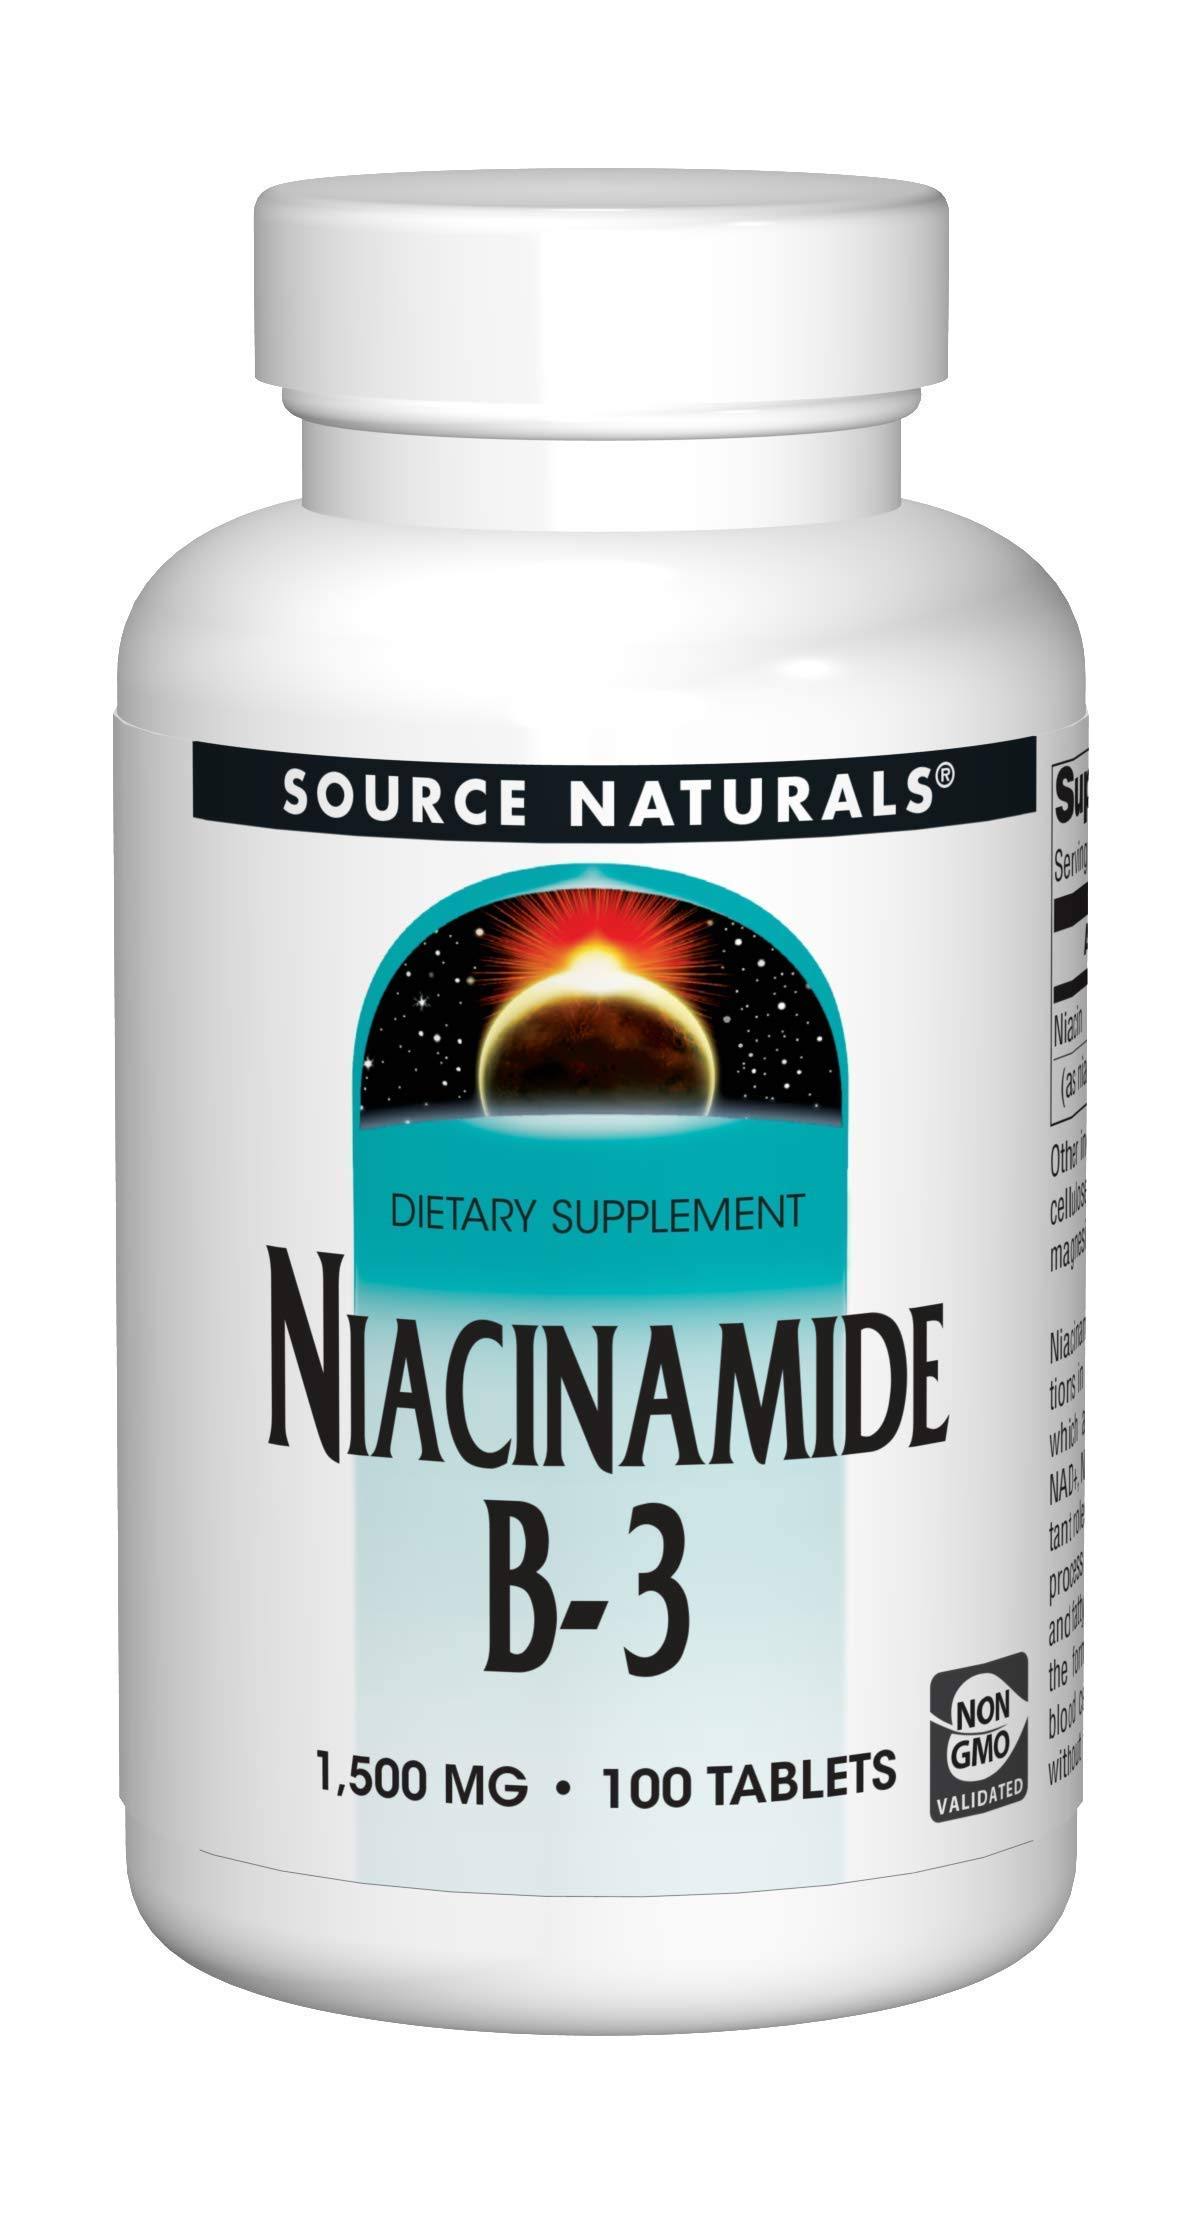 Source Naturals Niacinamide Dietary Supplement Tablets - 1500mg, 100ct